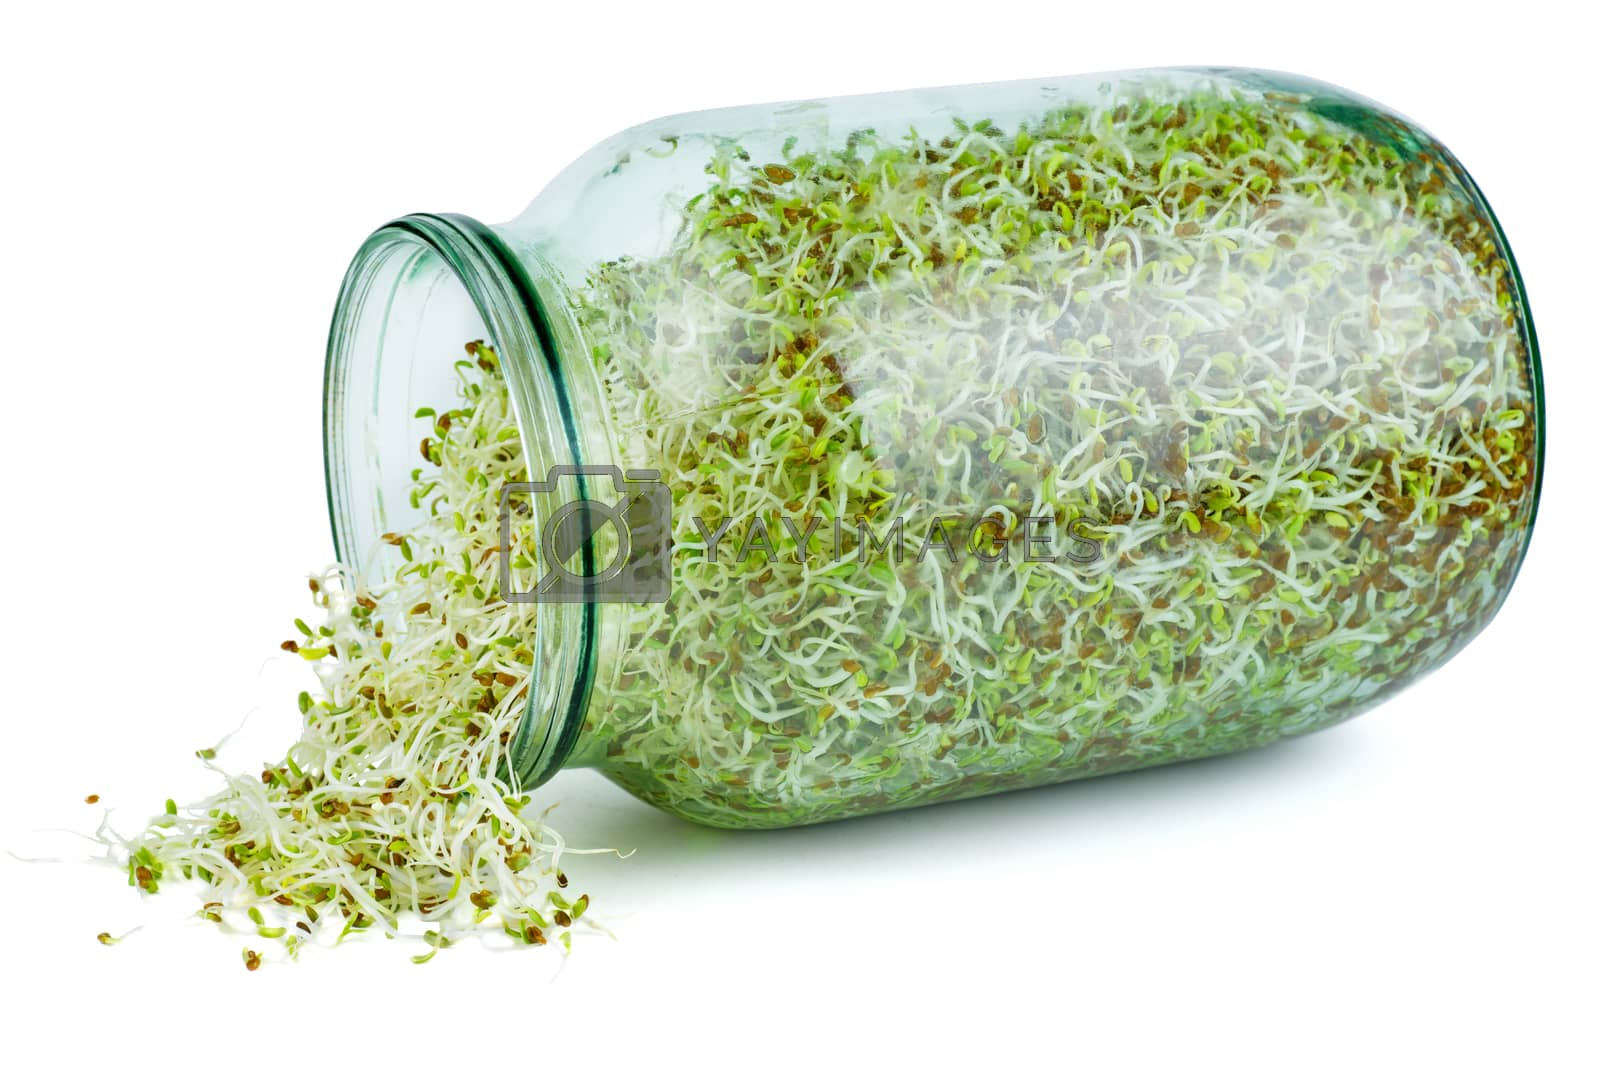 Royalty free image of Alfalfa sprouts in a glass jar by digitalr